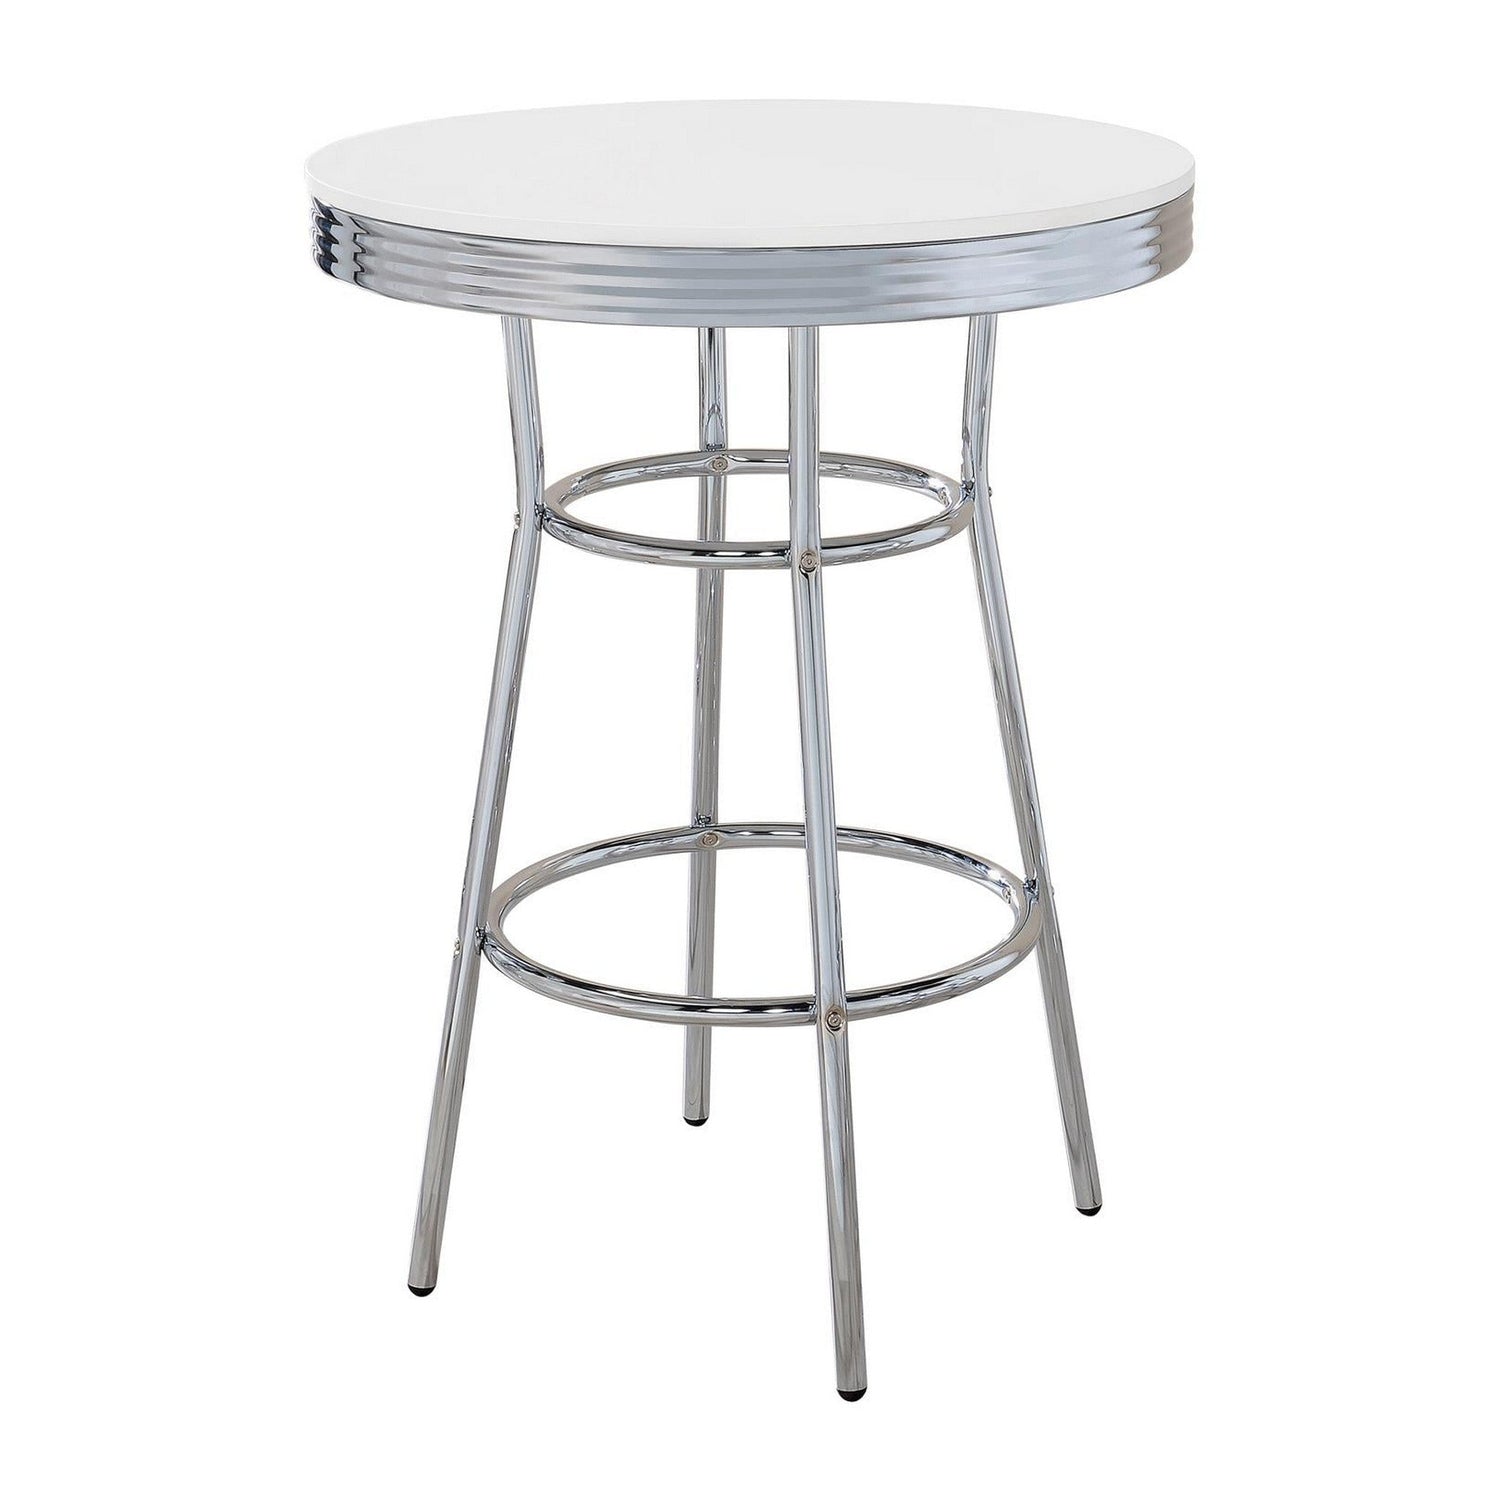 Theodore Round Bar Table Chrome and Glossy White 2300